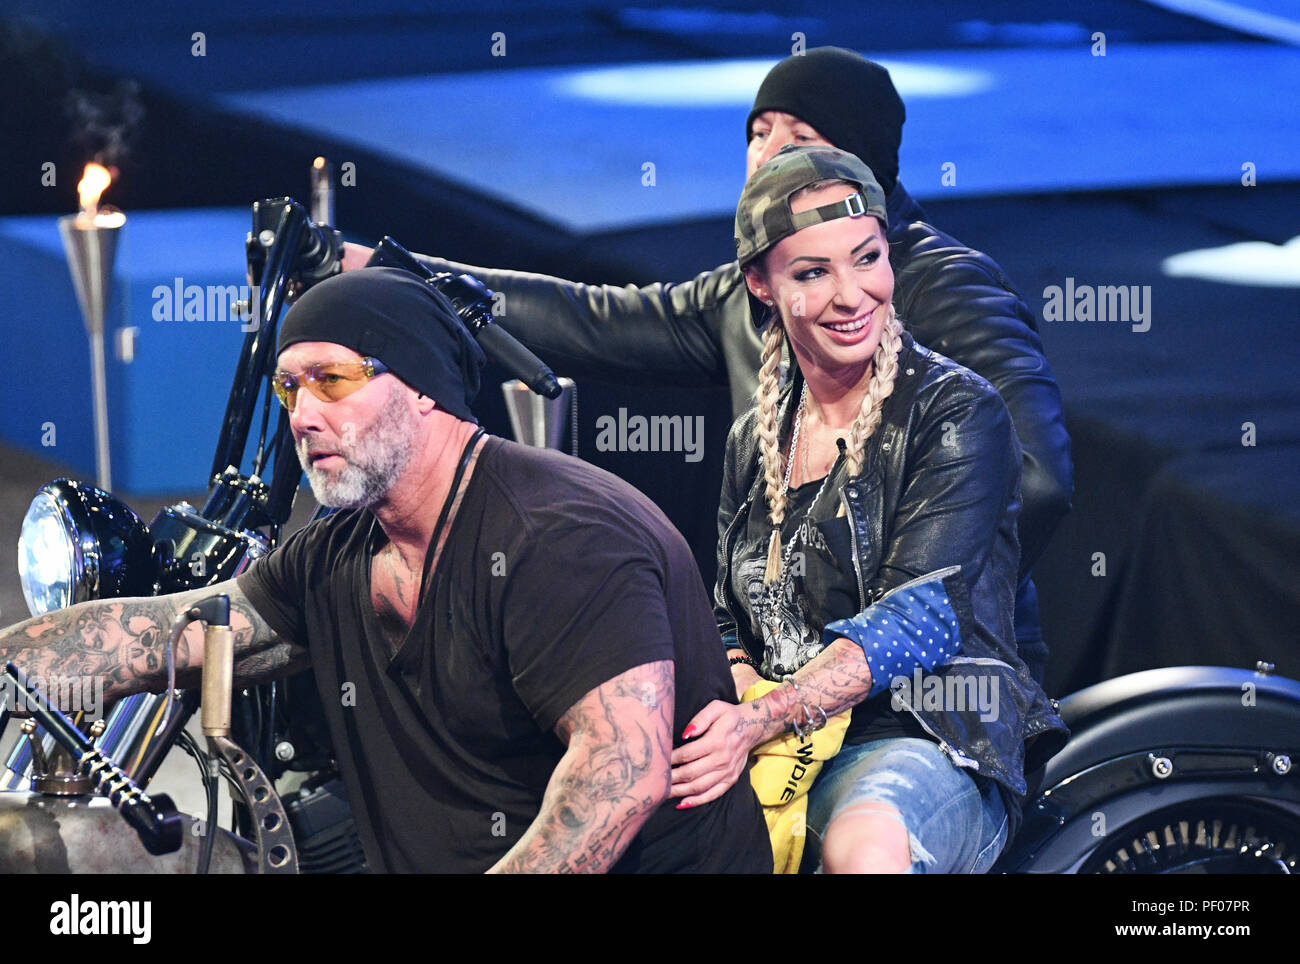 Cologne, Germany. 17th Aug, 2018. Cora Schumacher comes on stage with a motorcycle at the opening show of the new season of the Sat.1 reality show 'Promi Big Brother'. Credit: Henning Kaiser/dpa/Alamy Live News Stock Photo